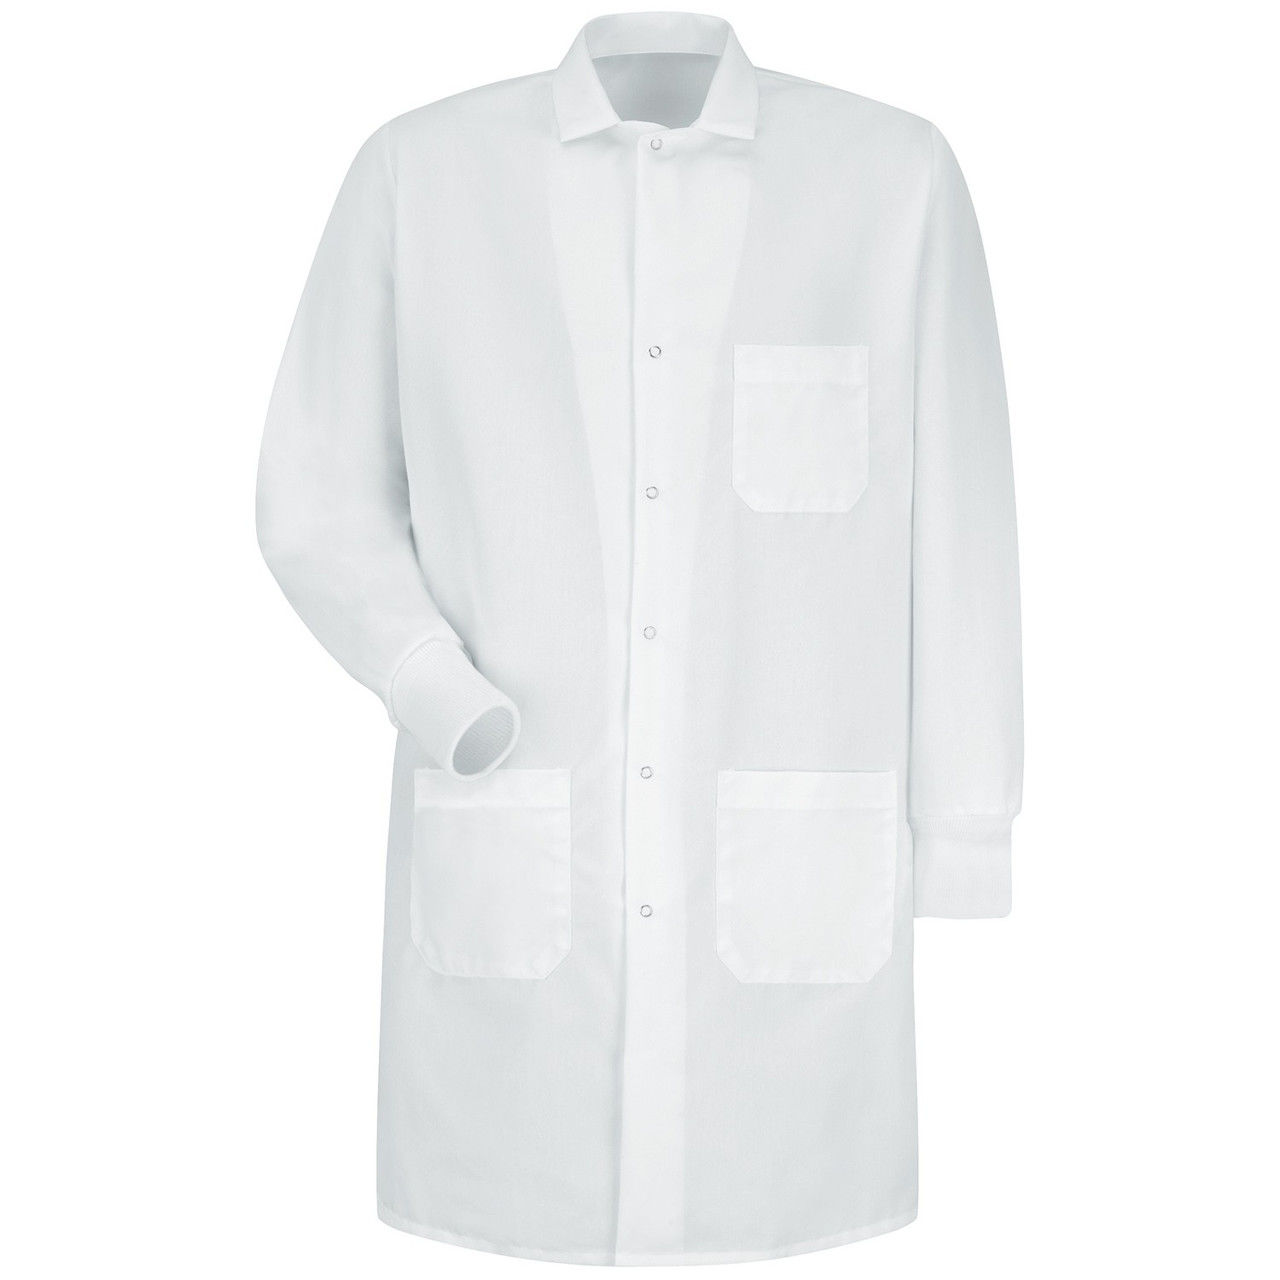 Do the red kap lab coats have side vent openings?